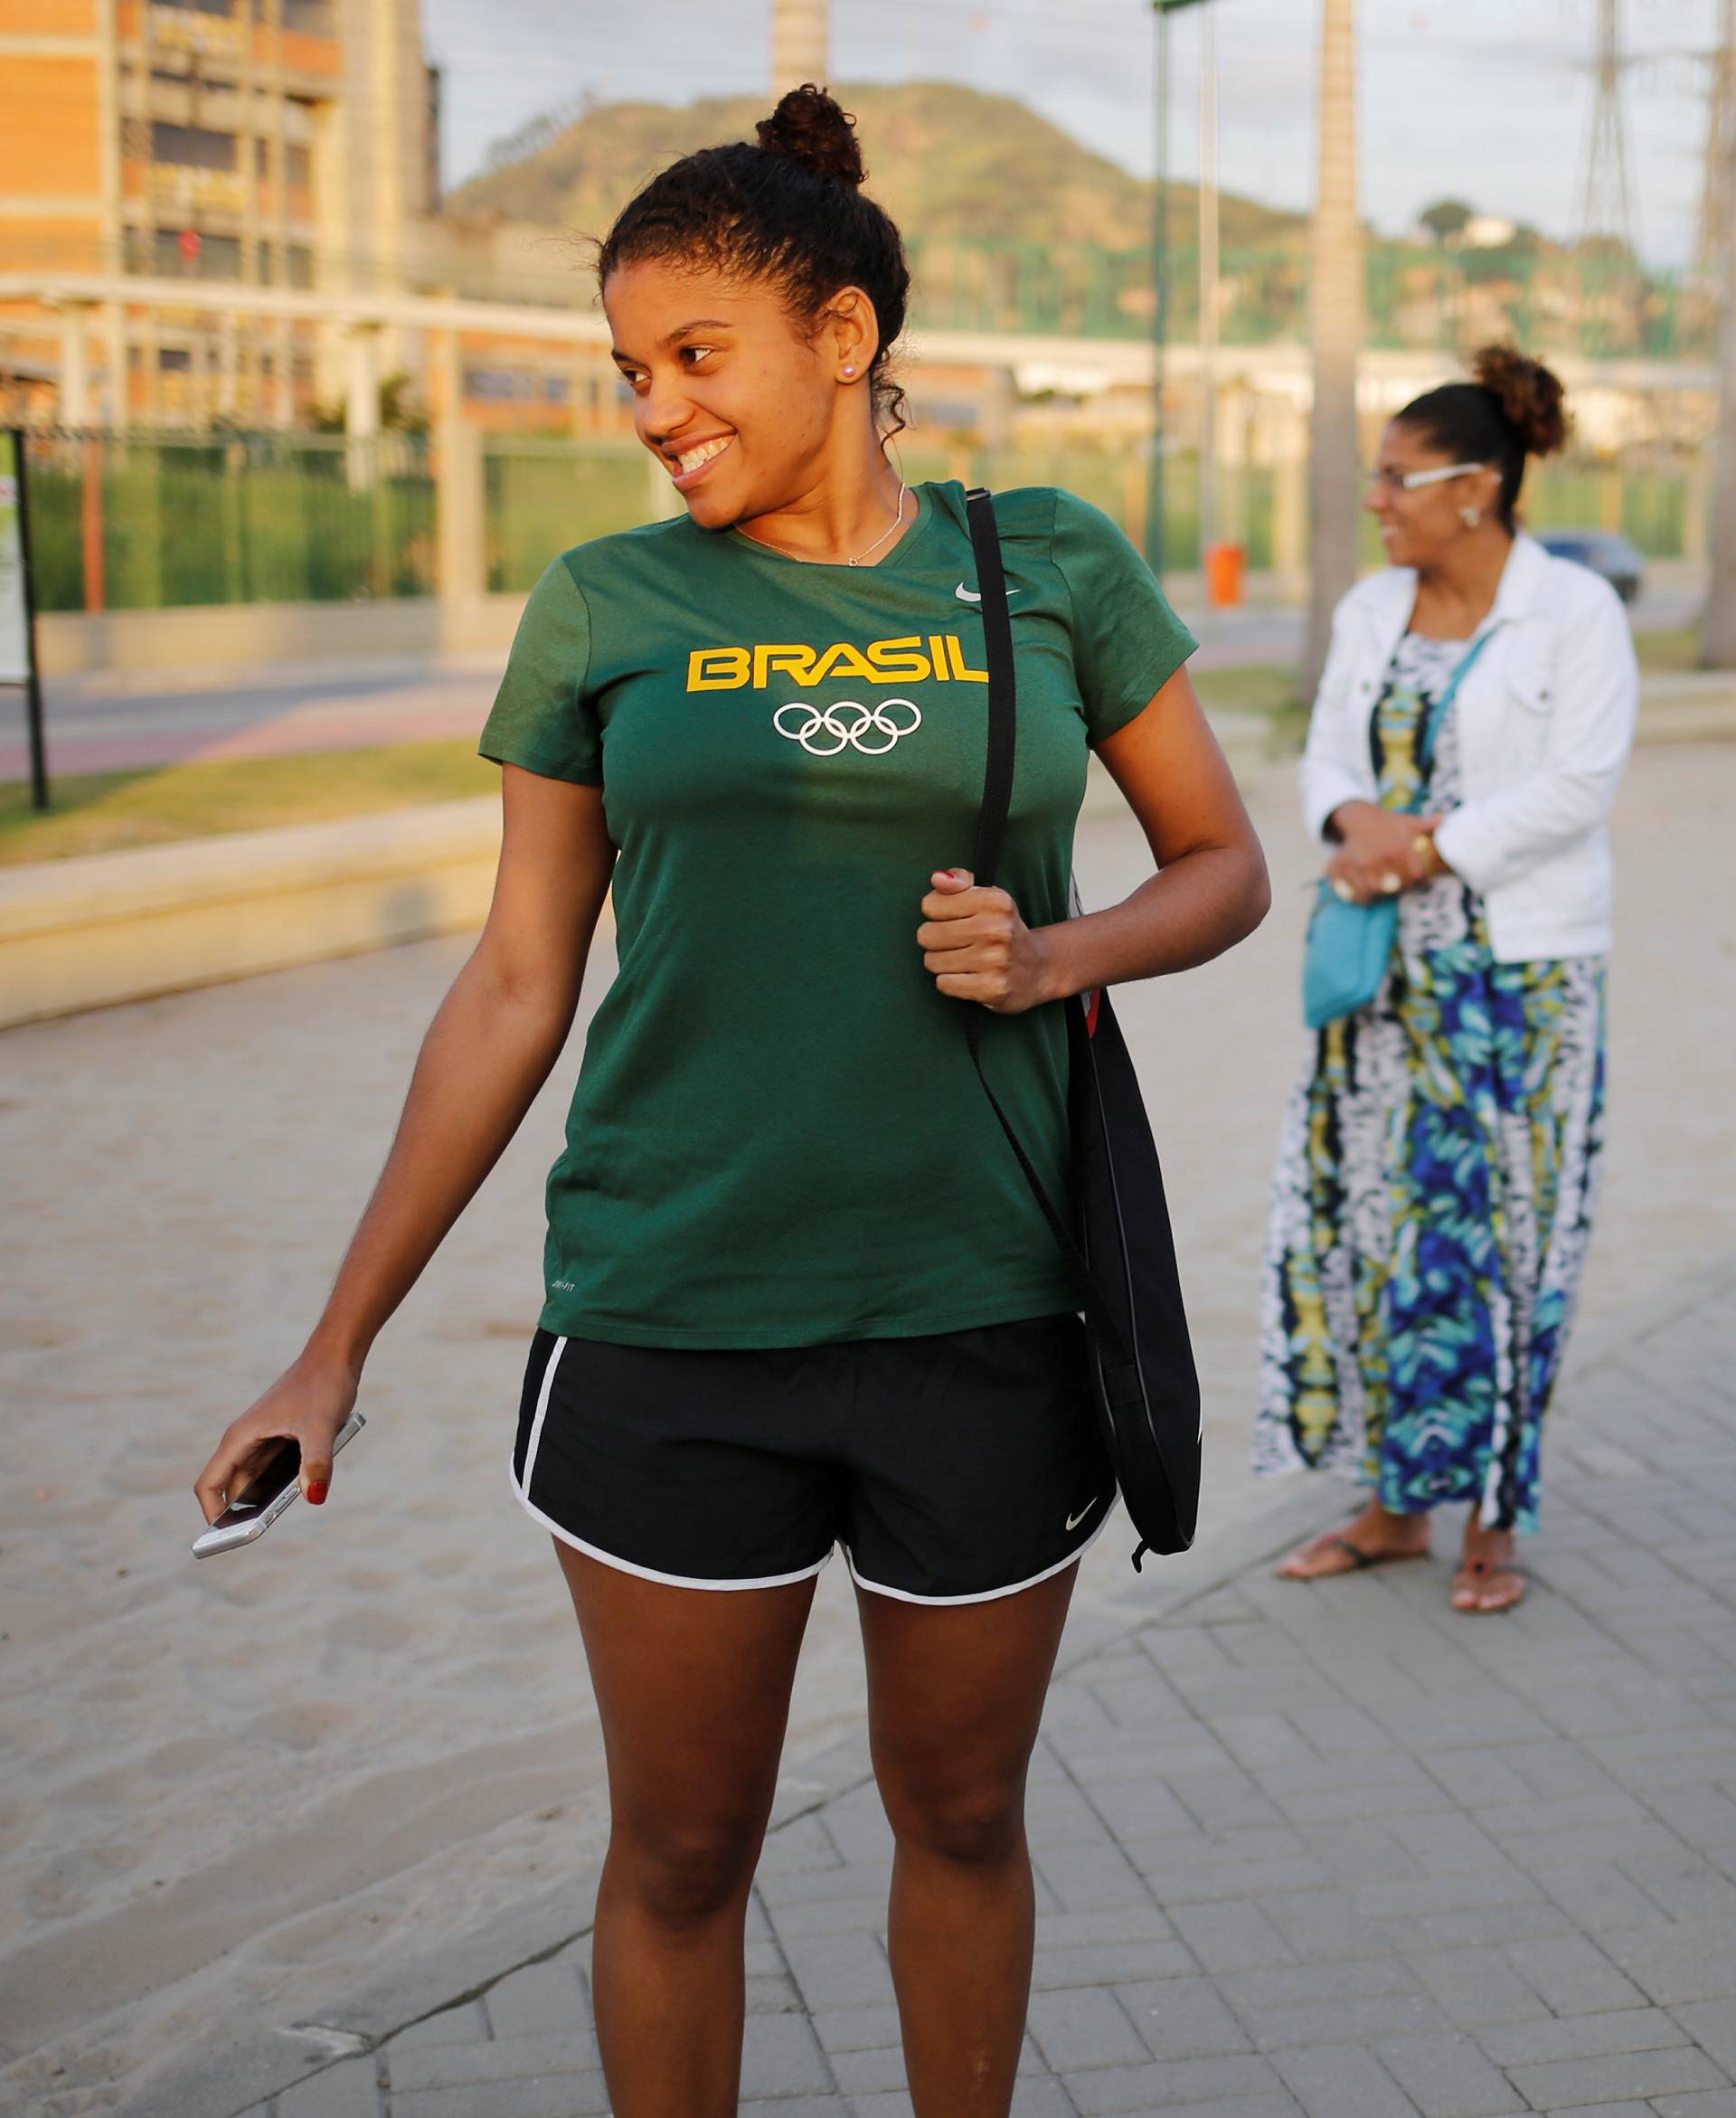 2016 Rio Olympics: Rio sisters: from violence to the Olympics